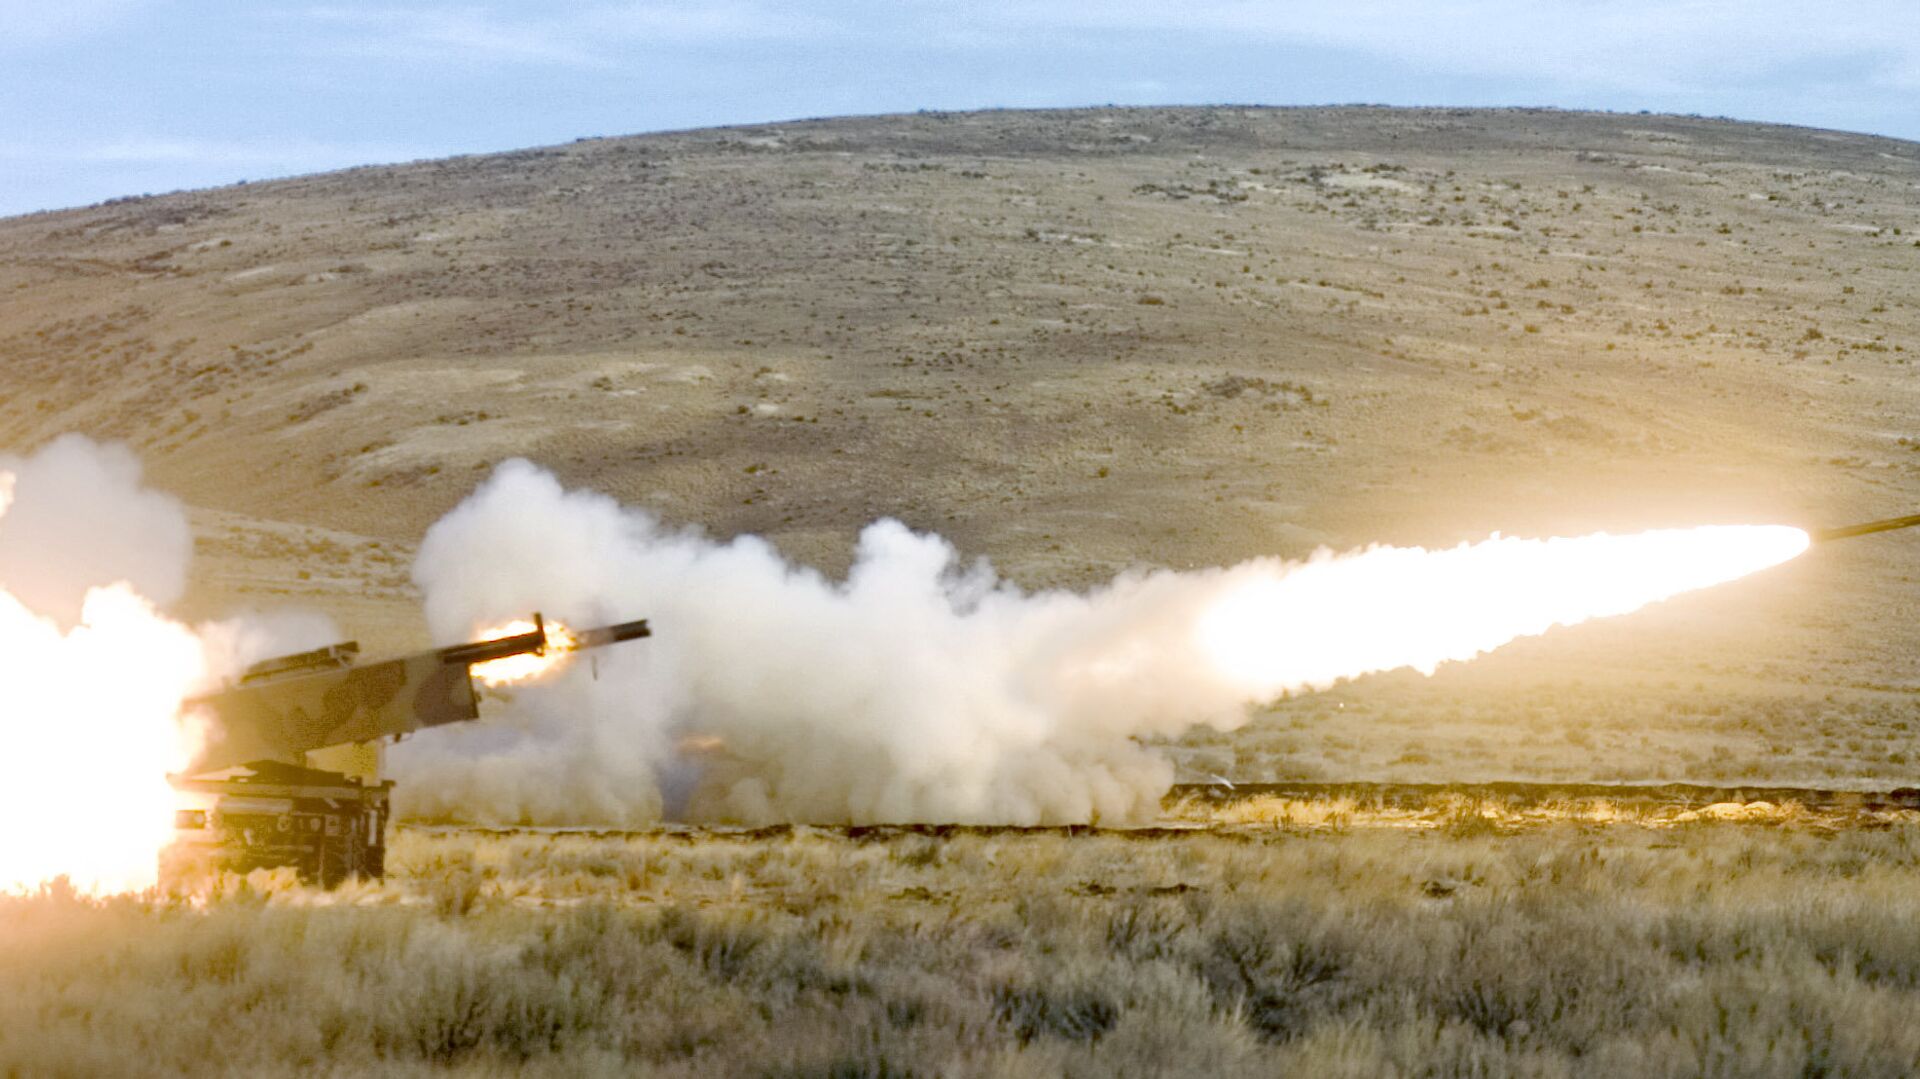 Members of the 17th Fires Brigade from Ft. Lewis fire two High Mobility Artillery Rocket System (HIMARS) rockets simultaneously in a training exercise at Yakima Training Center Nov. 1, 2007 in Yakima, Wash. - Sputnik International, 1920, 03.06.2022